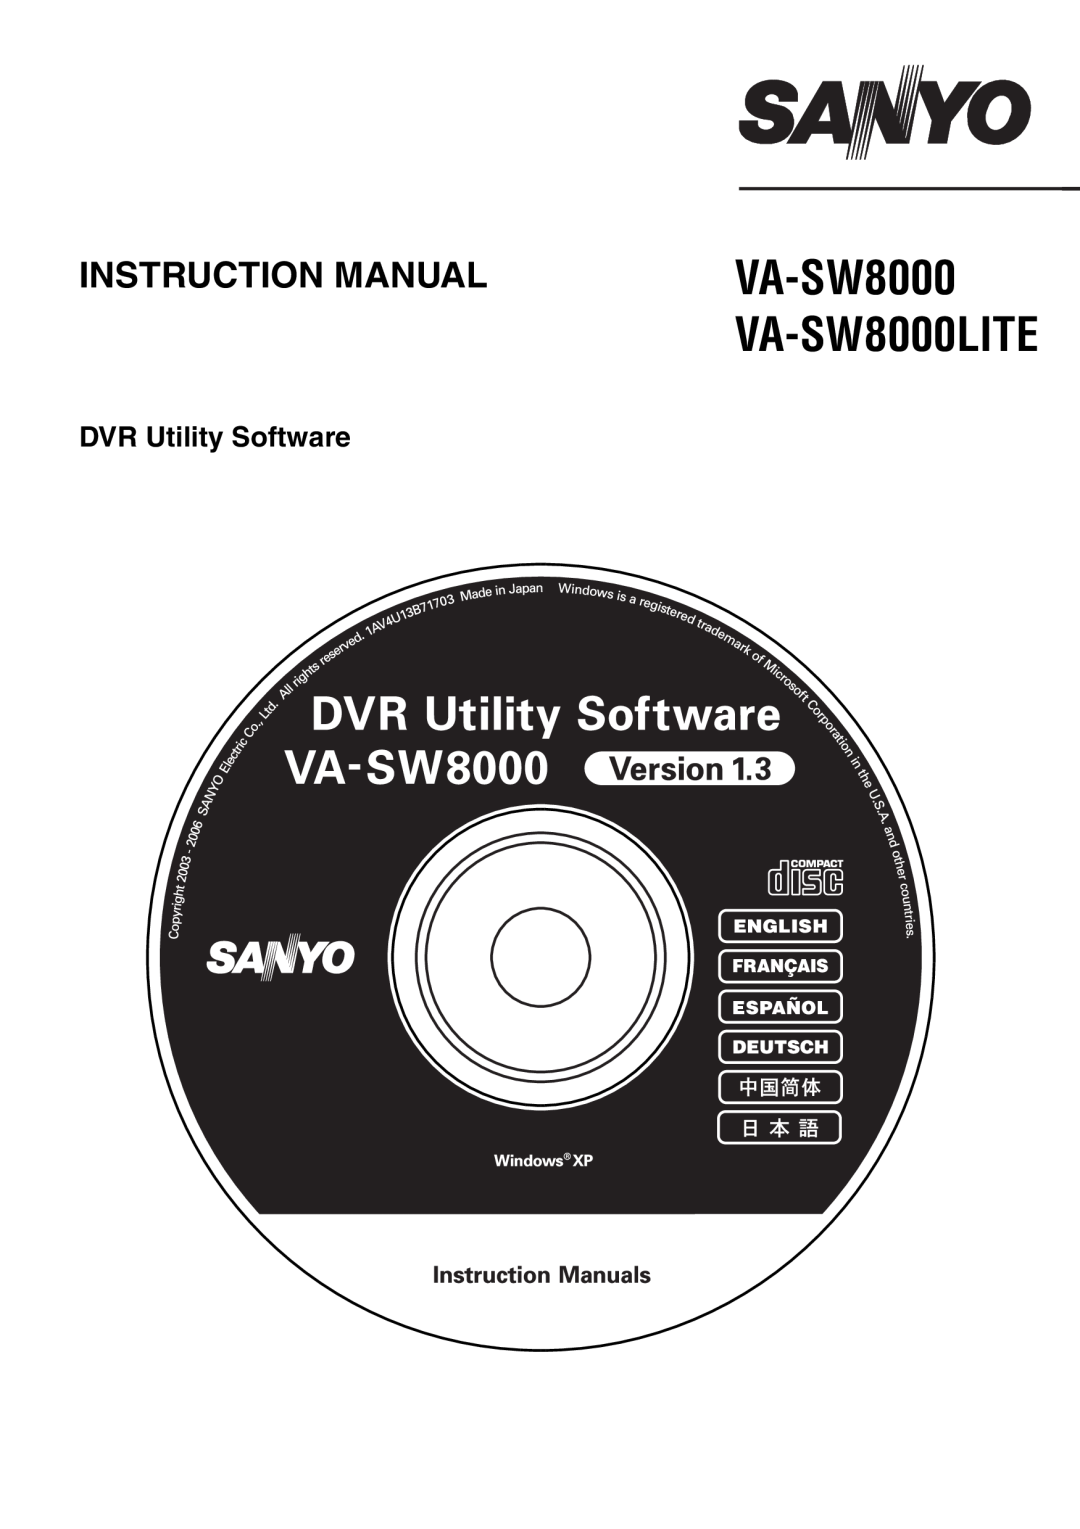 Sanyo user manual What’s new in VA-SW8000?, Using the Tree edit function, Technical Tips, January 